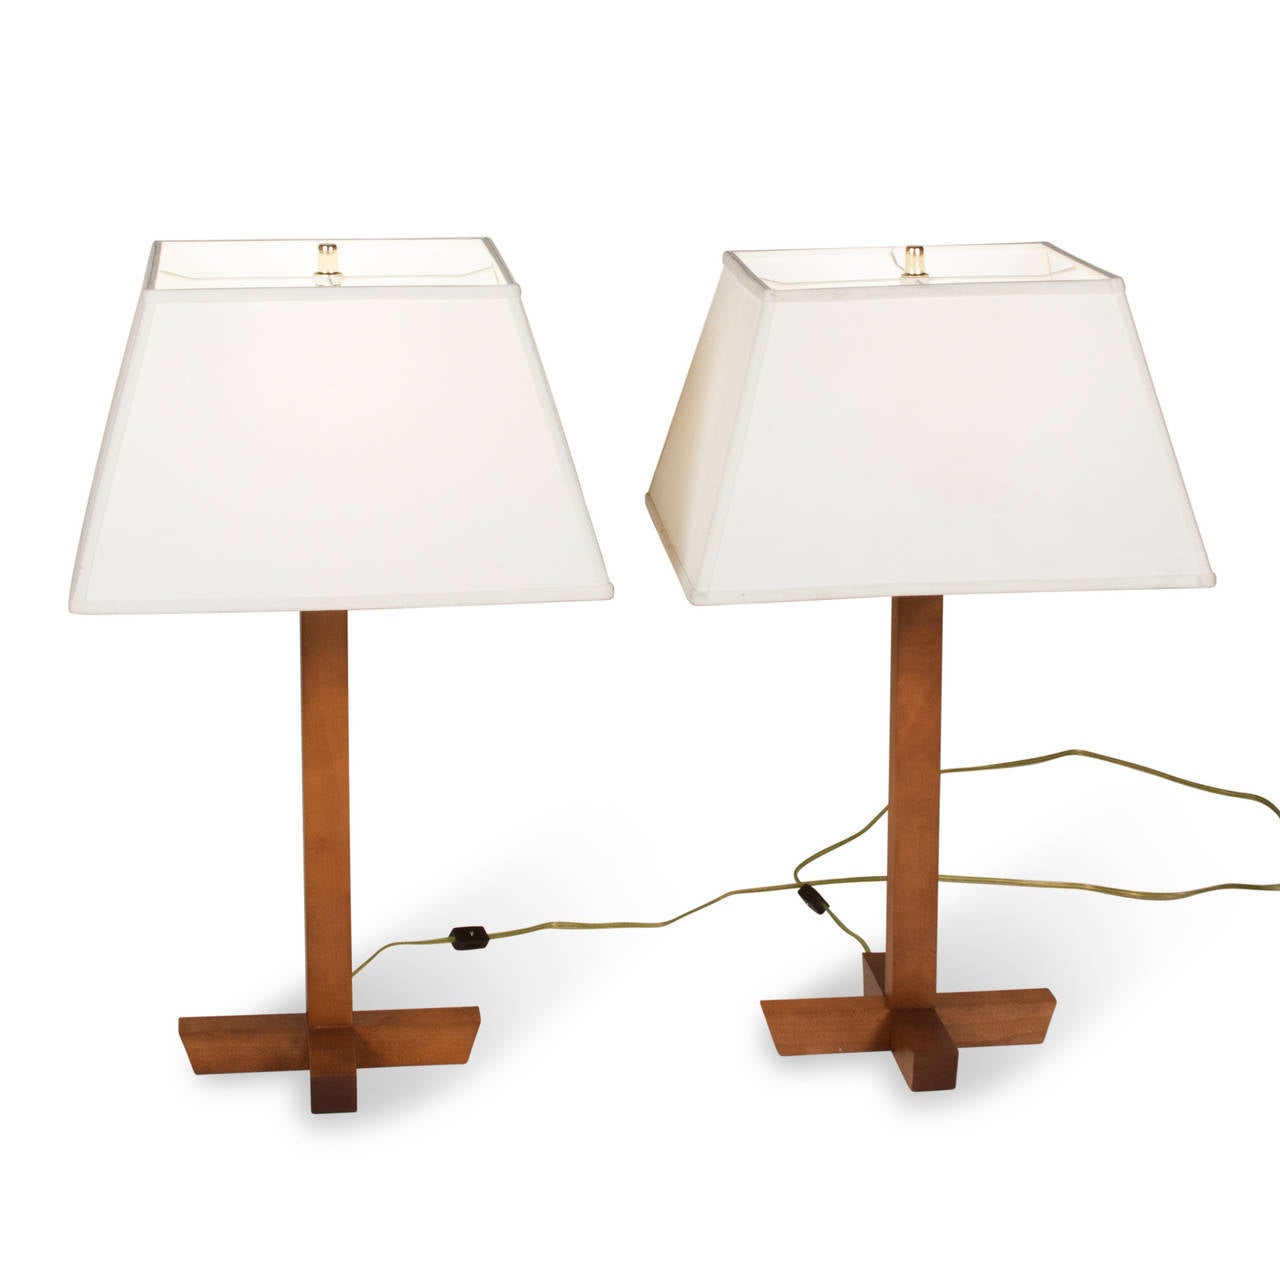 Pair of walnut table lamps, a single square column mounted on an X-base of walnut, American, 1970s. Overall height 27 in, base measures 10 in square. Height to top of socket 19 1/2 in. Wood is 1 1/2 in square. Shade measures top 11 1/2 in square,